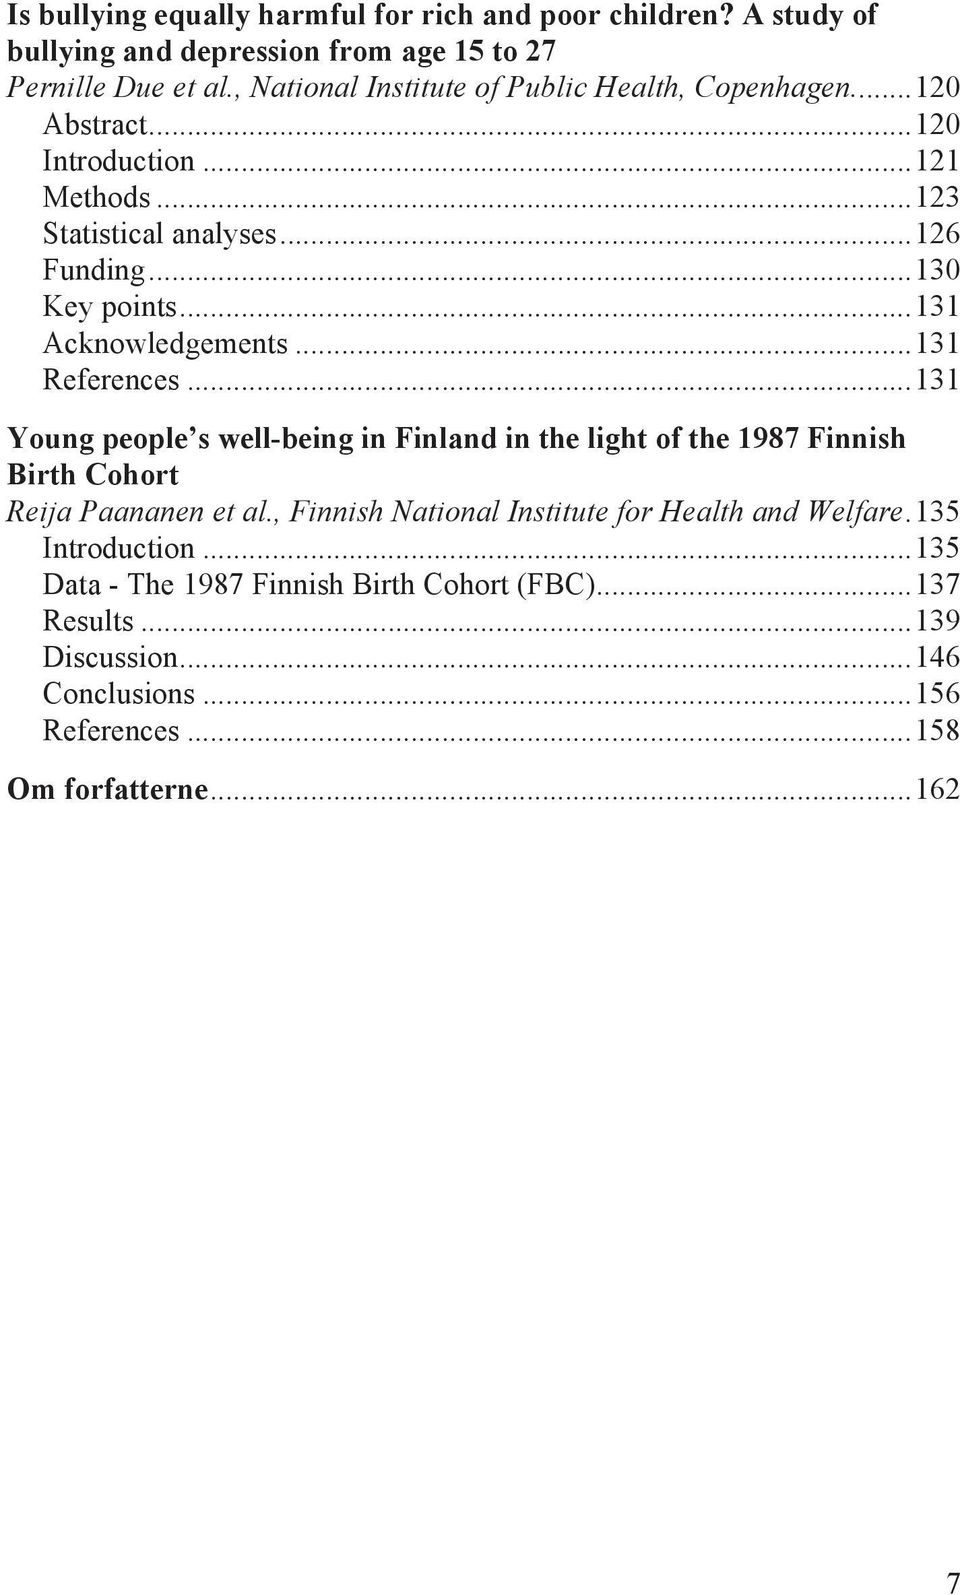 .. 131 Acknowledgements... 131 References... 131 Young people s well-being in Finland in the light of the 1987 Finnish Birth Cohort Reija Paananen et al.